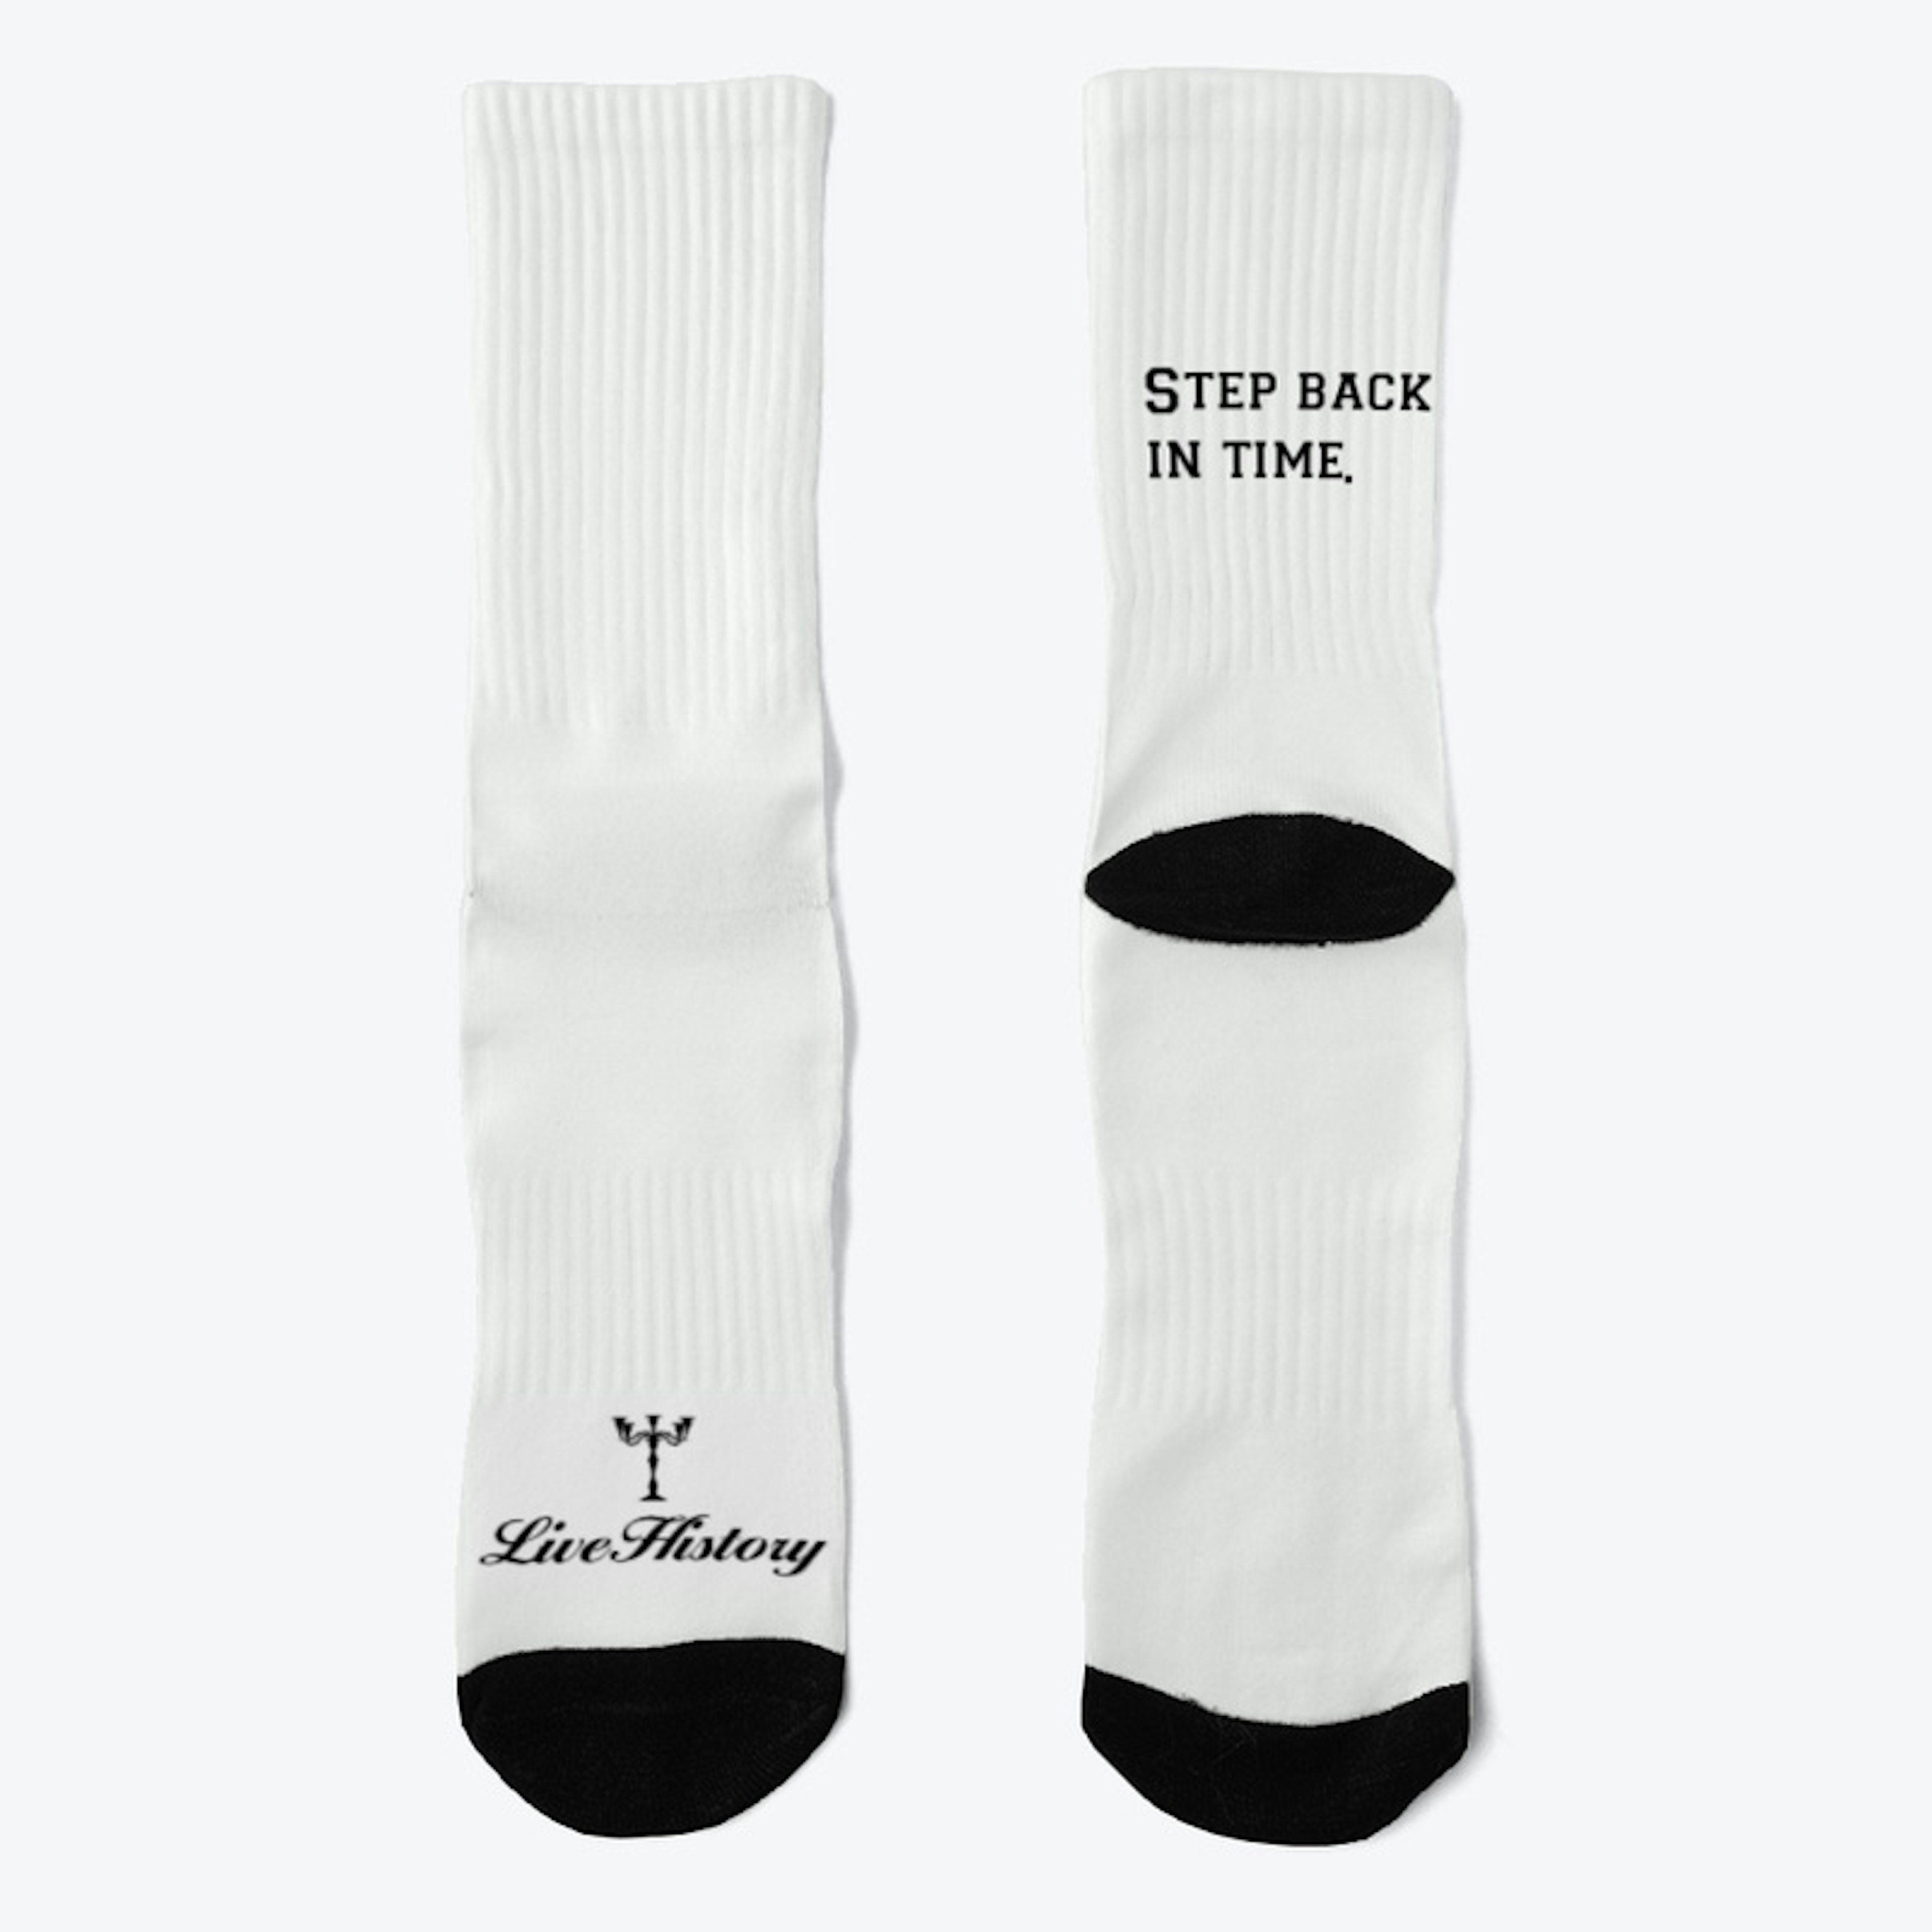 Step back in time with cute socks! 